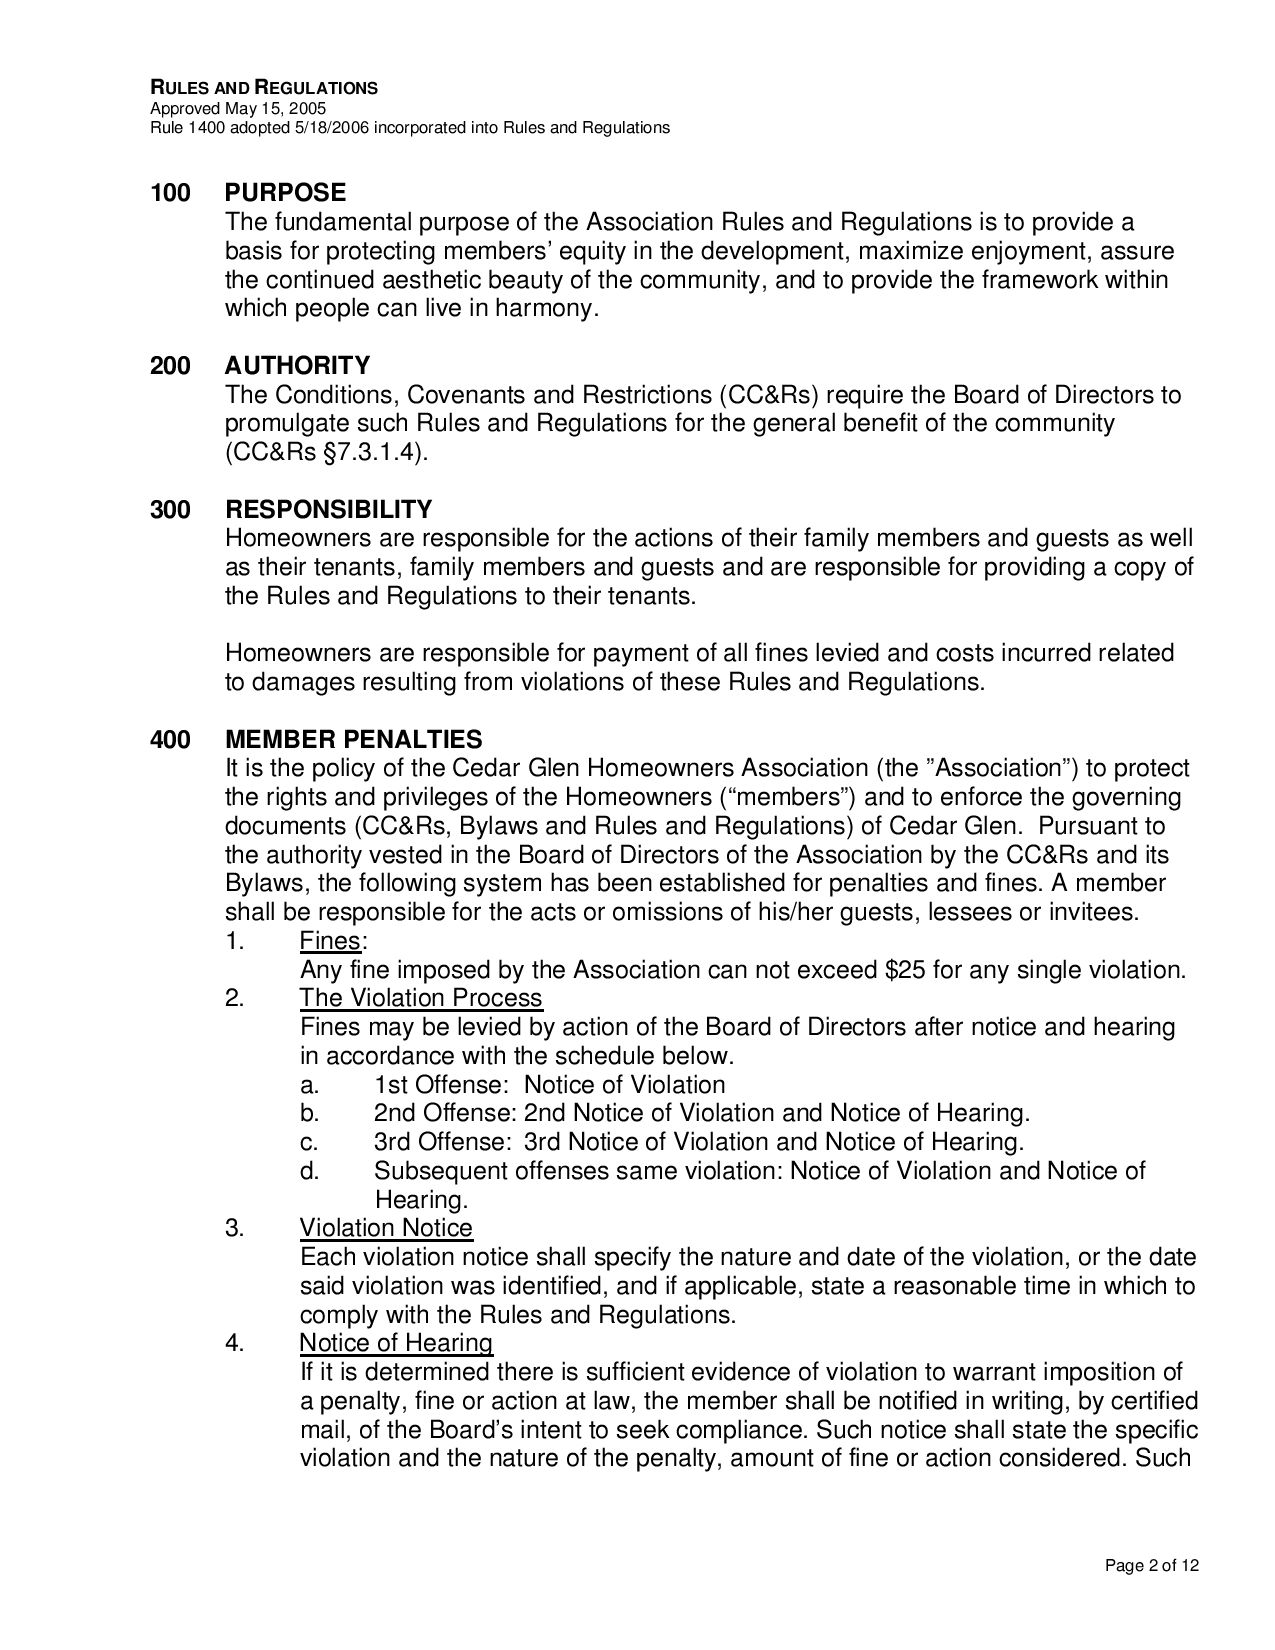 Page 2 of the HOA Rules and Regulations